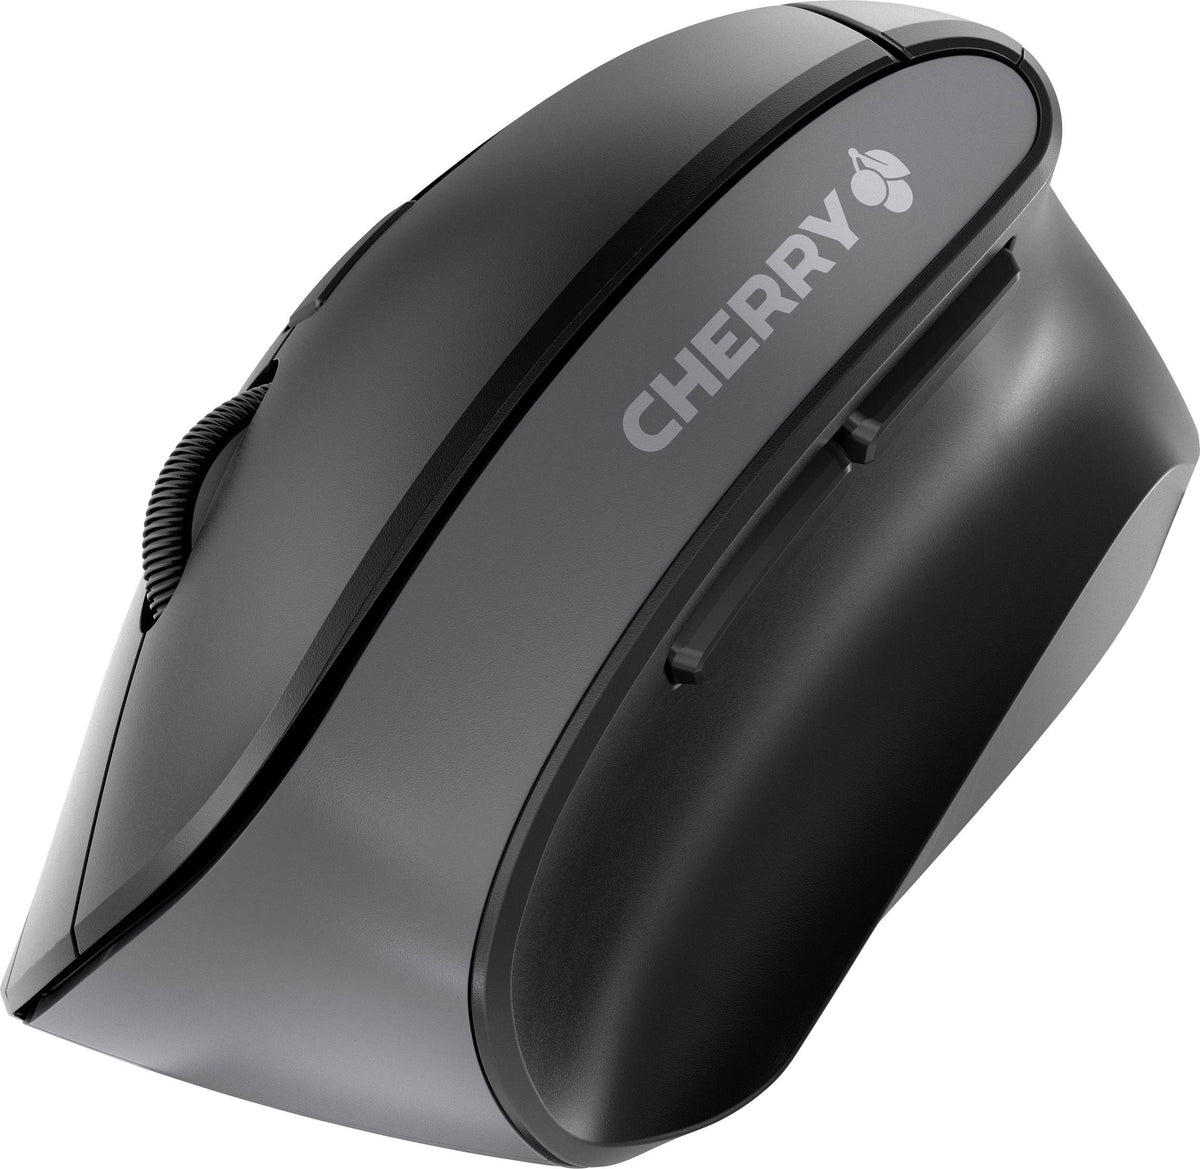 CHERRY MW 4500 - Upright mouse - ergonomic - right hand - optical - 6 buttons - wireless - 2.4 GHz - USB wireless receiver - black